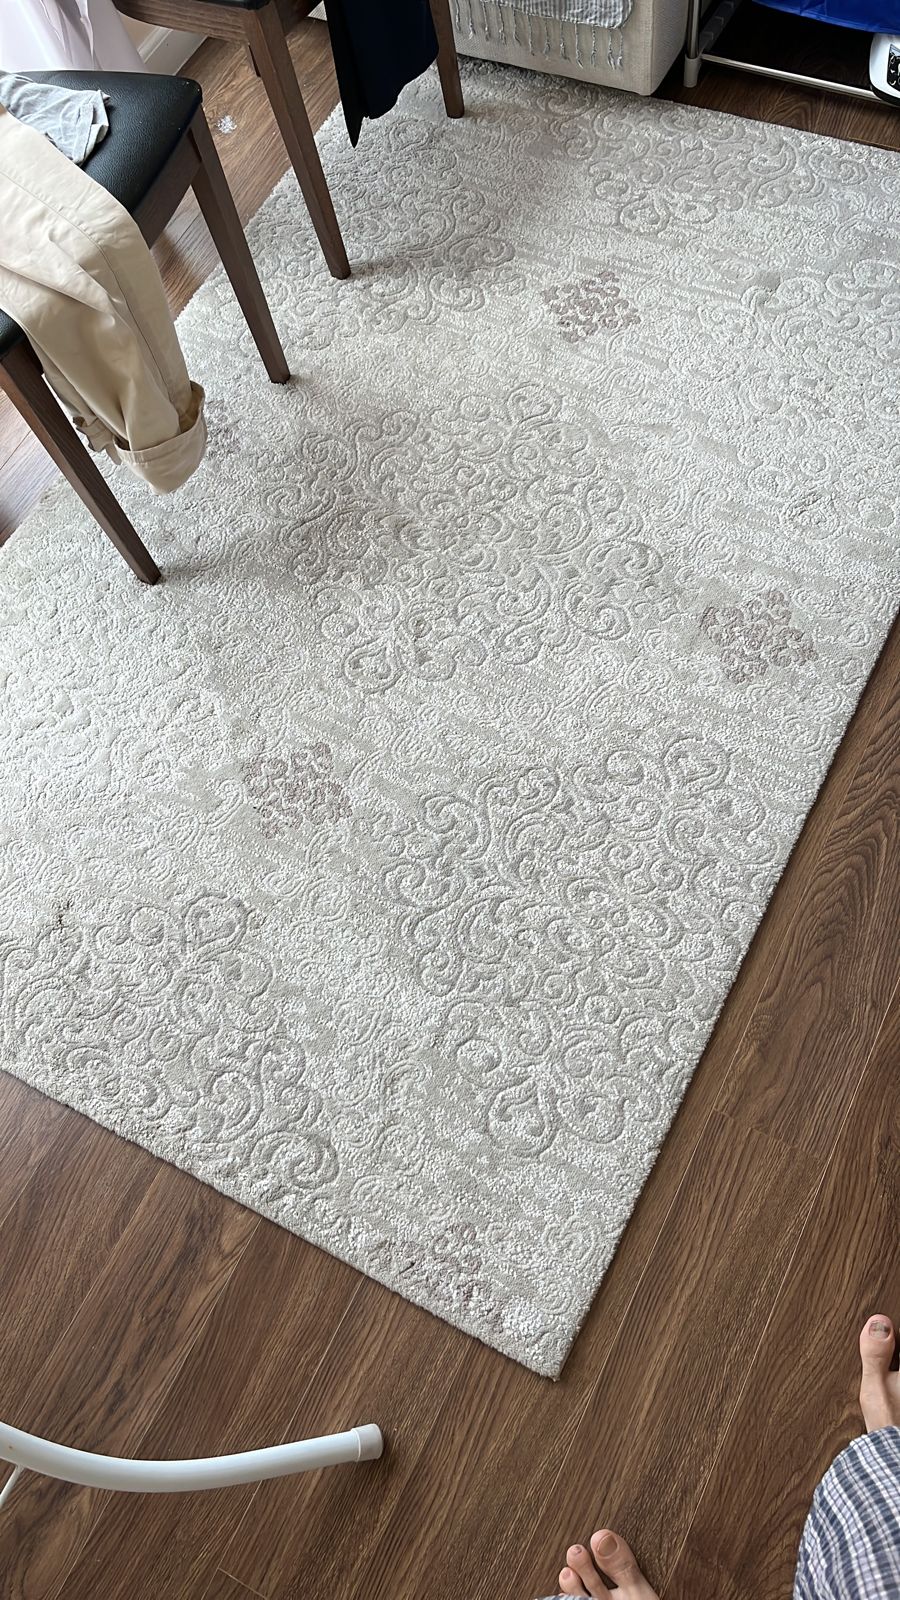 Carpet cleaning - pick up and drop off